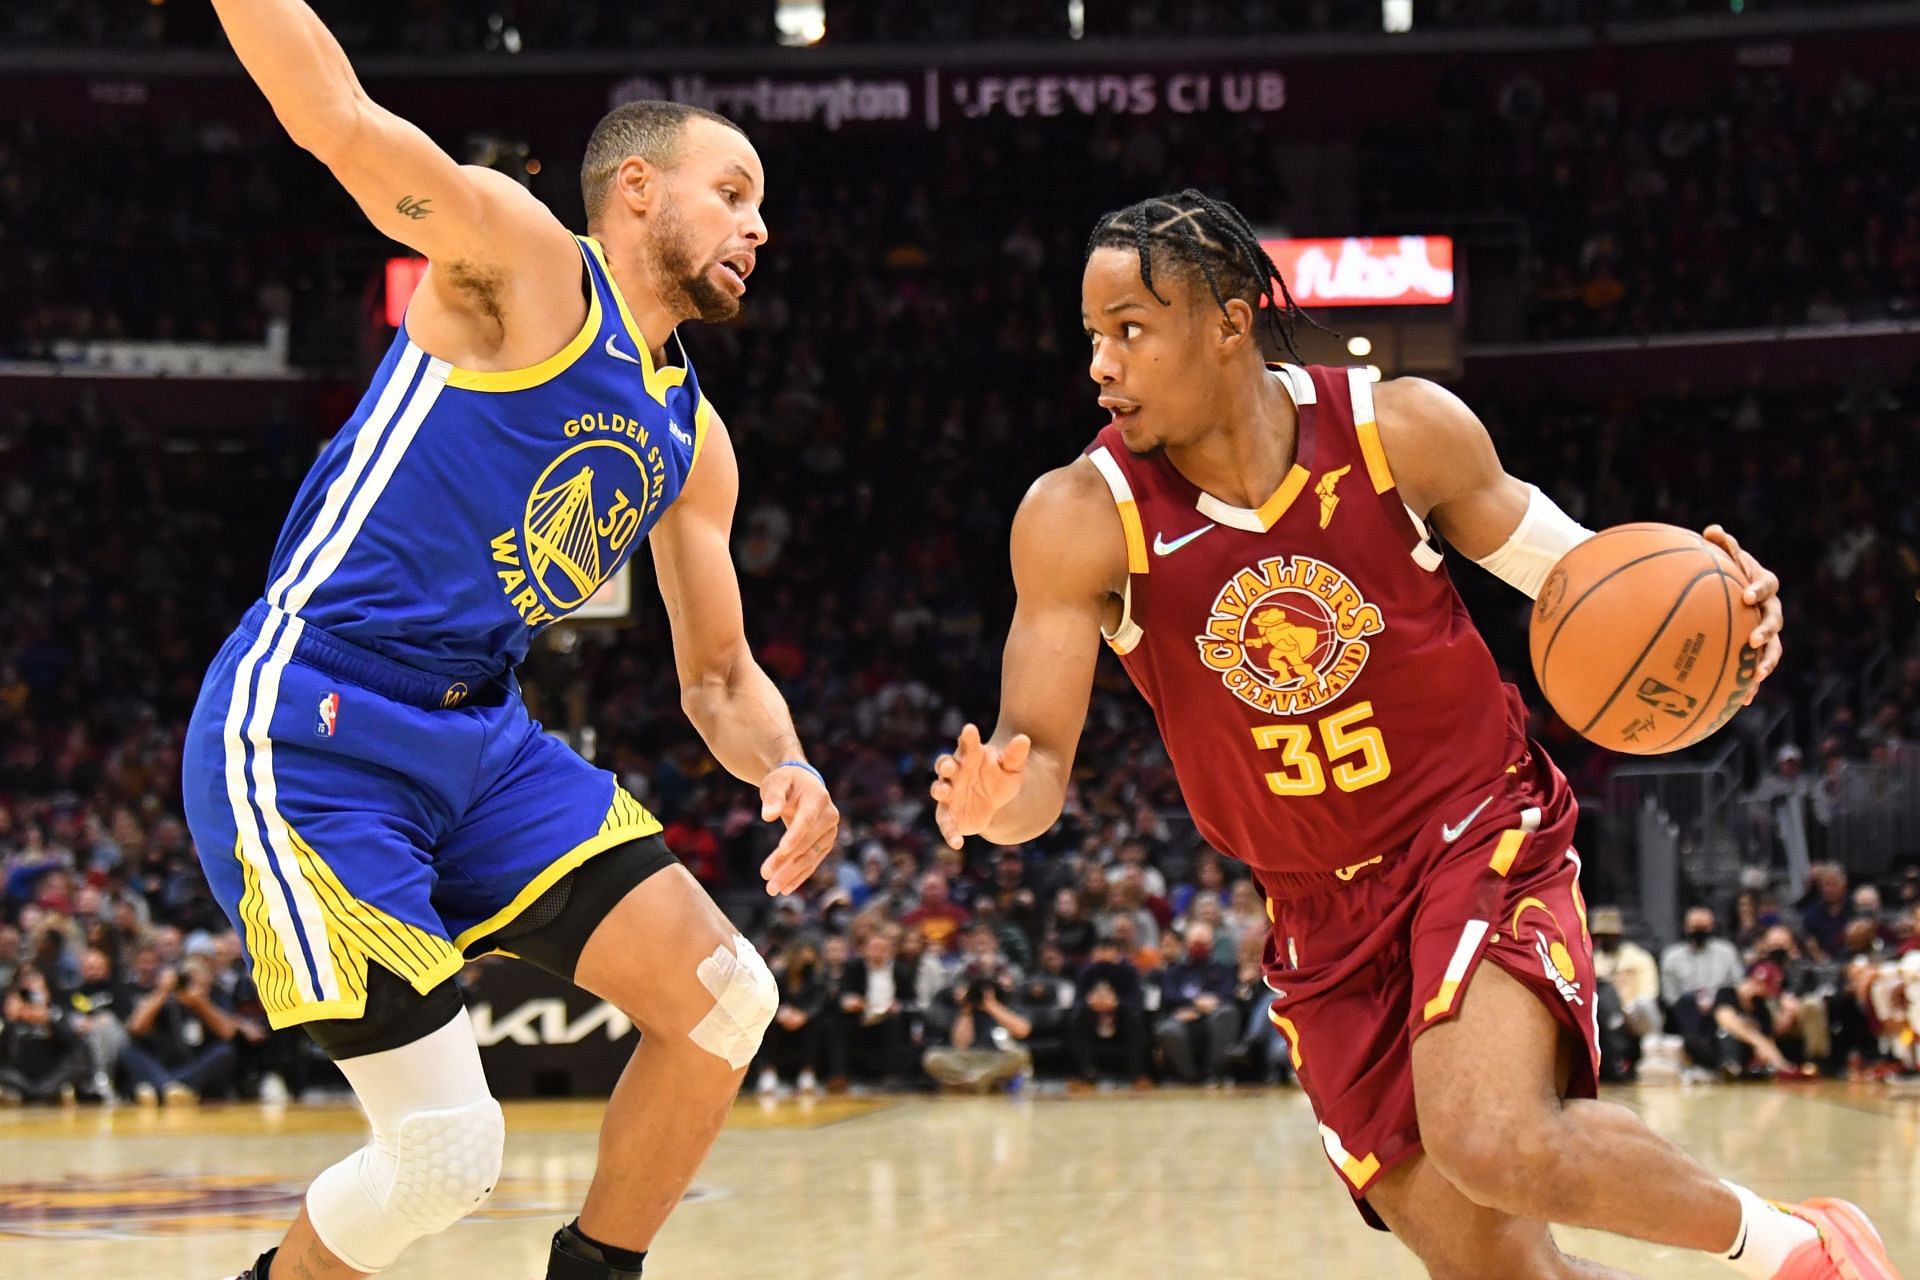 Stephen Curry (L) of Golden State Warriors was unstoppable against Cleveland Cavaliers